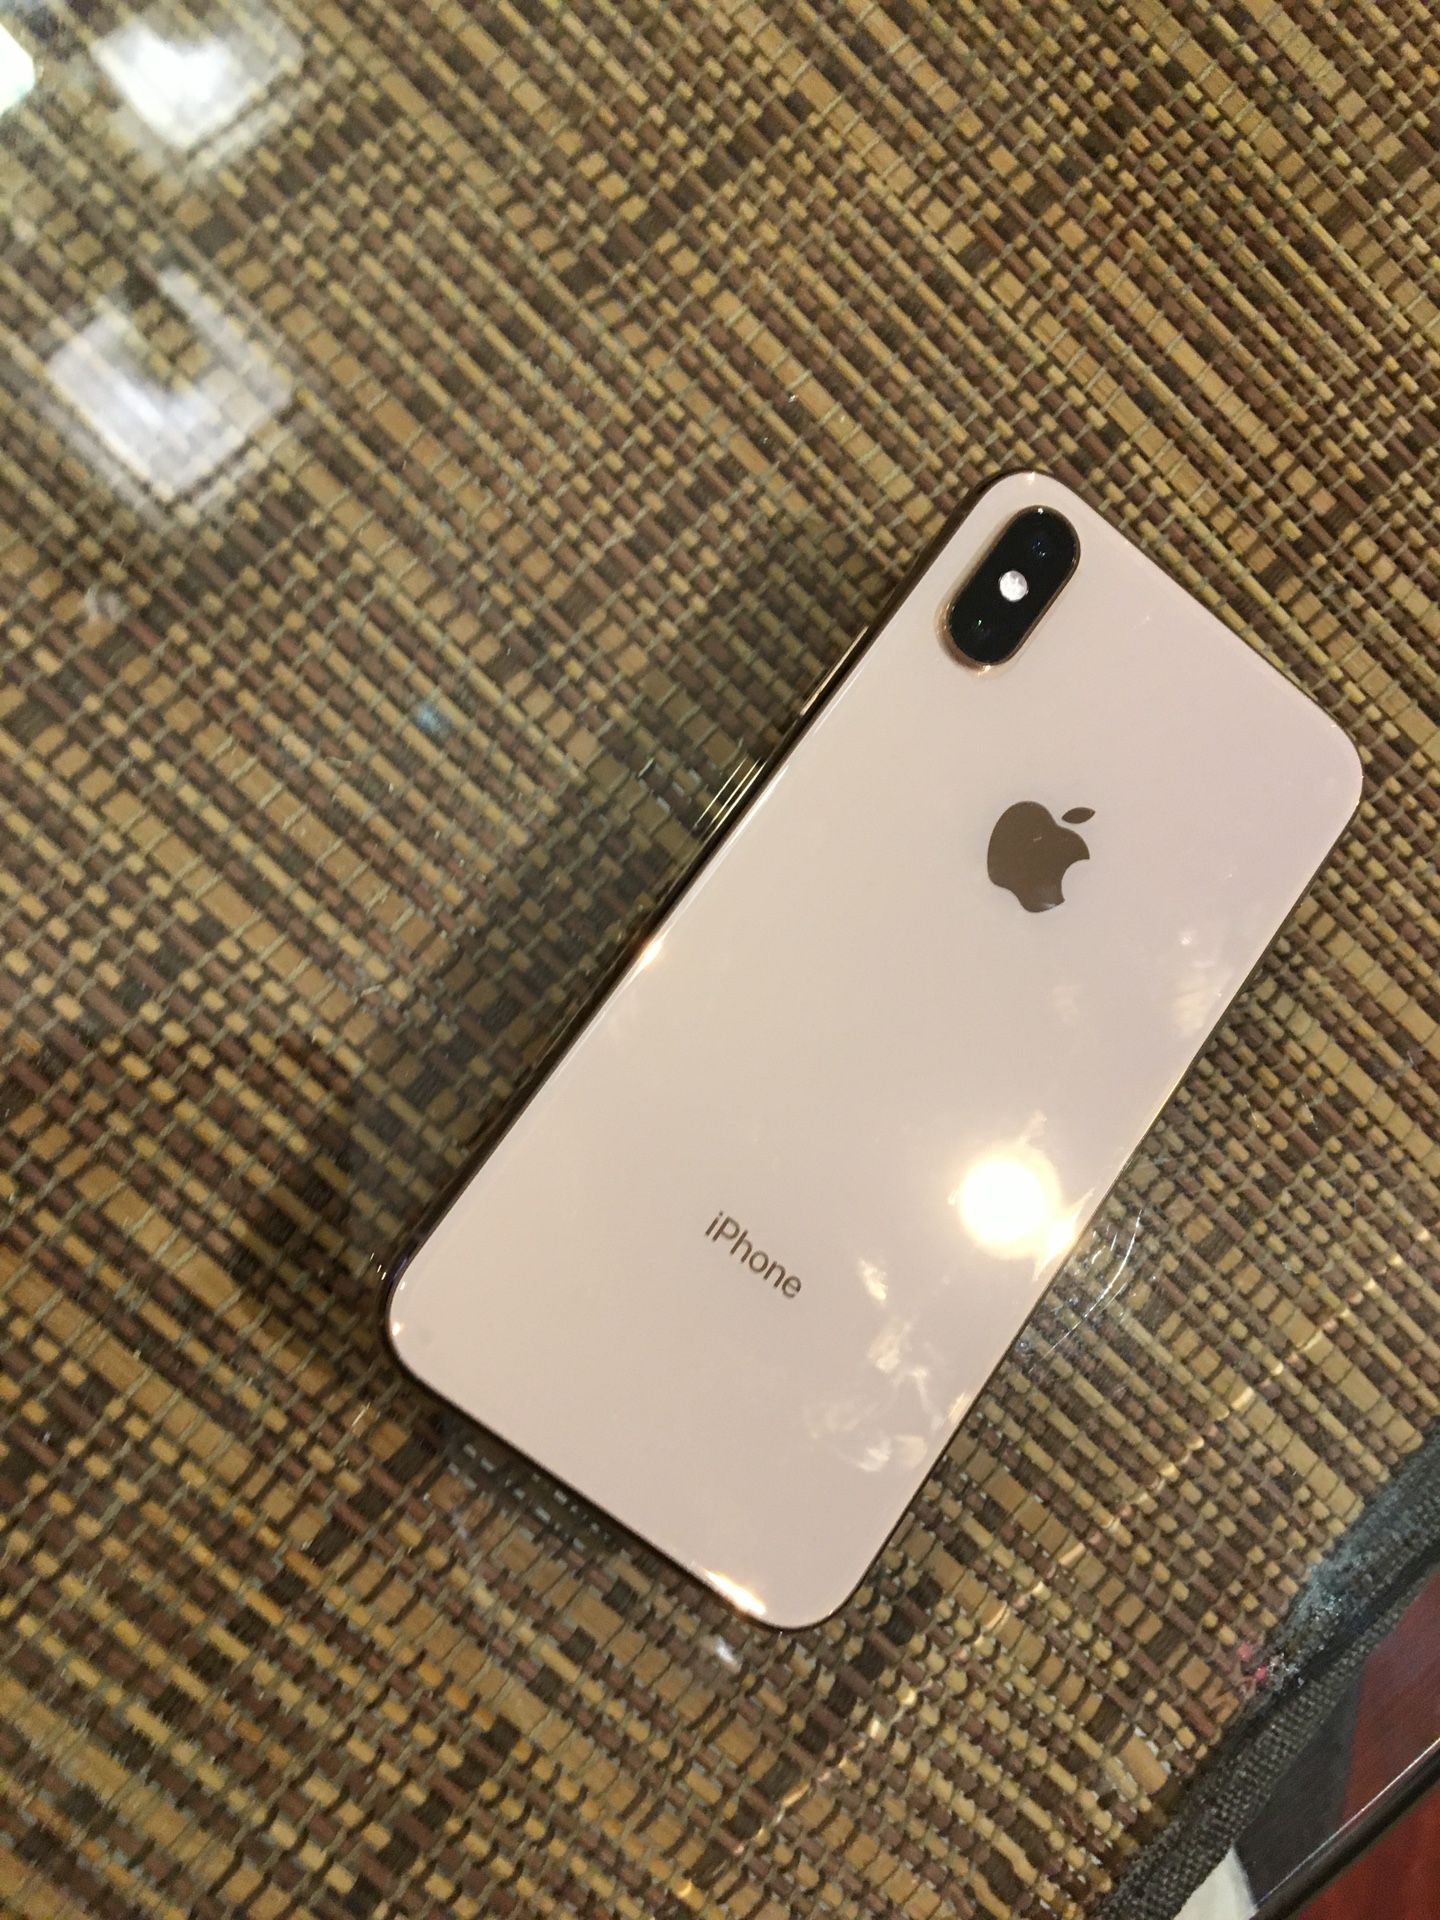 iPhone XS - Gold 64gb for sale! $800